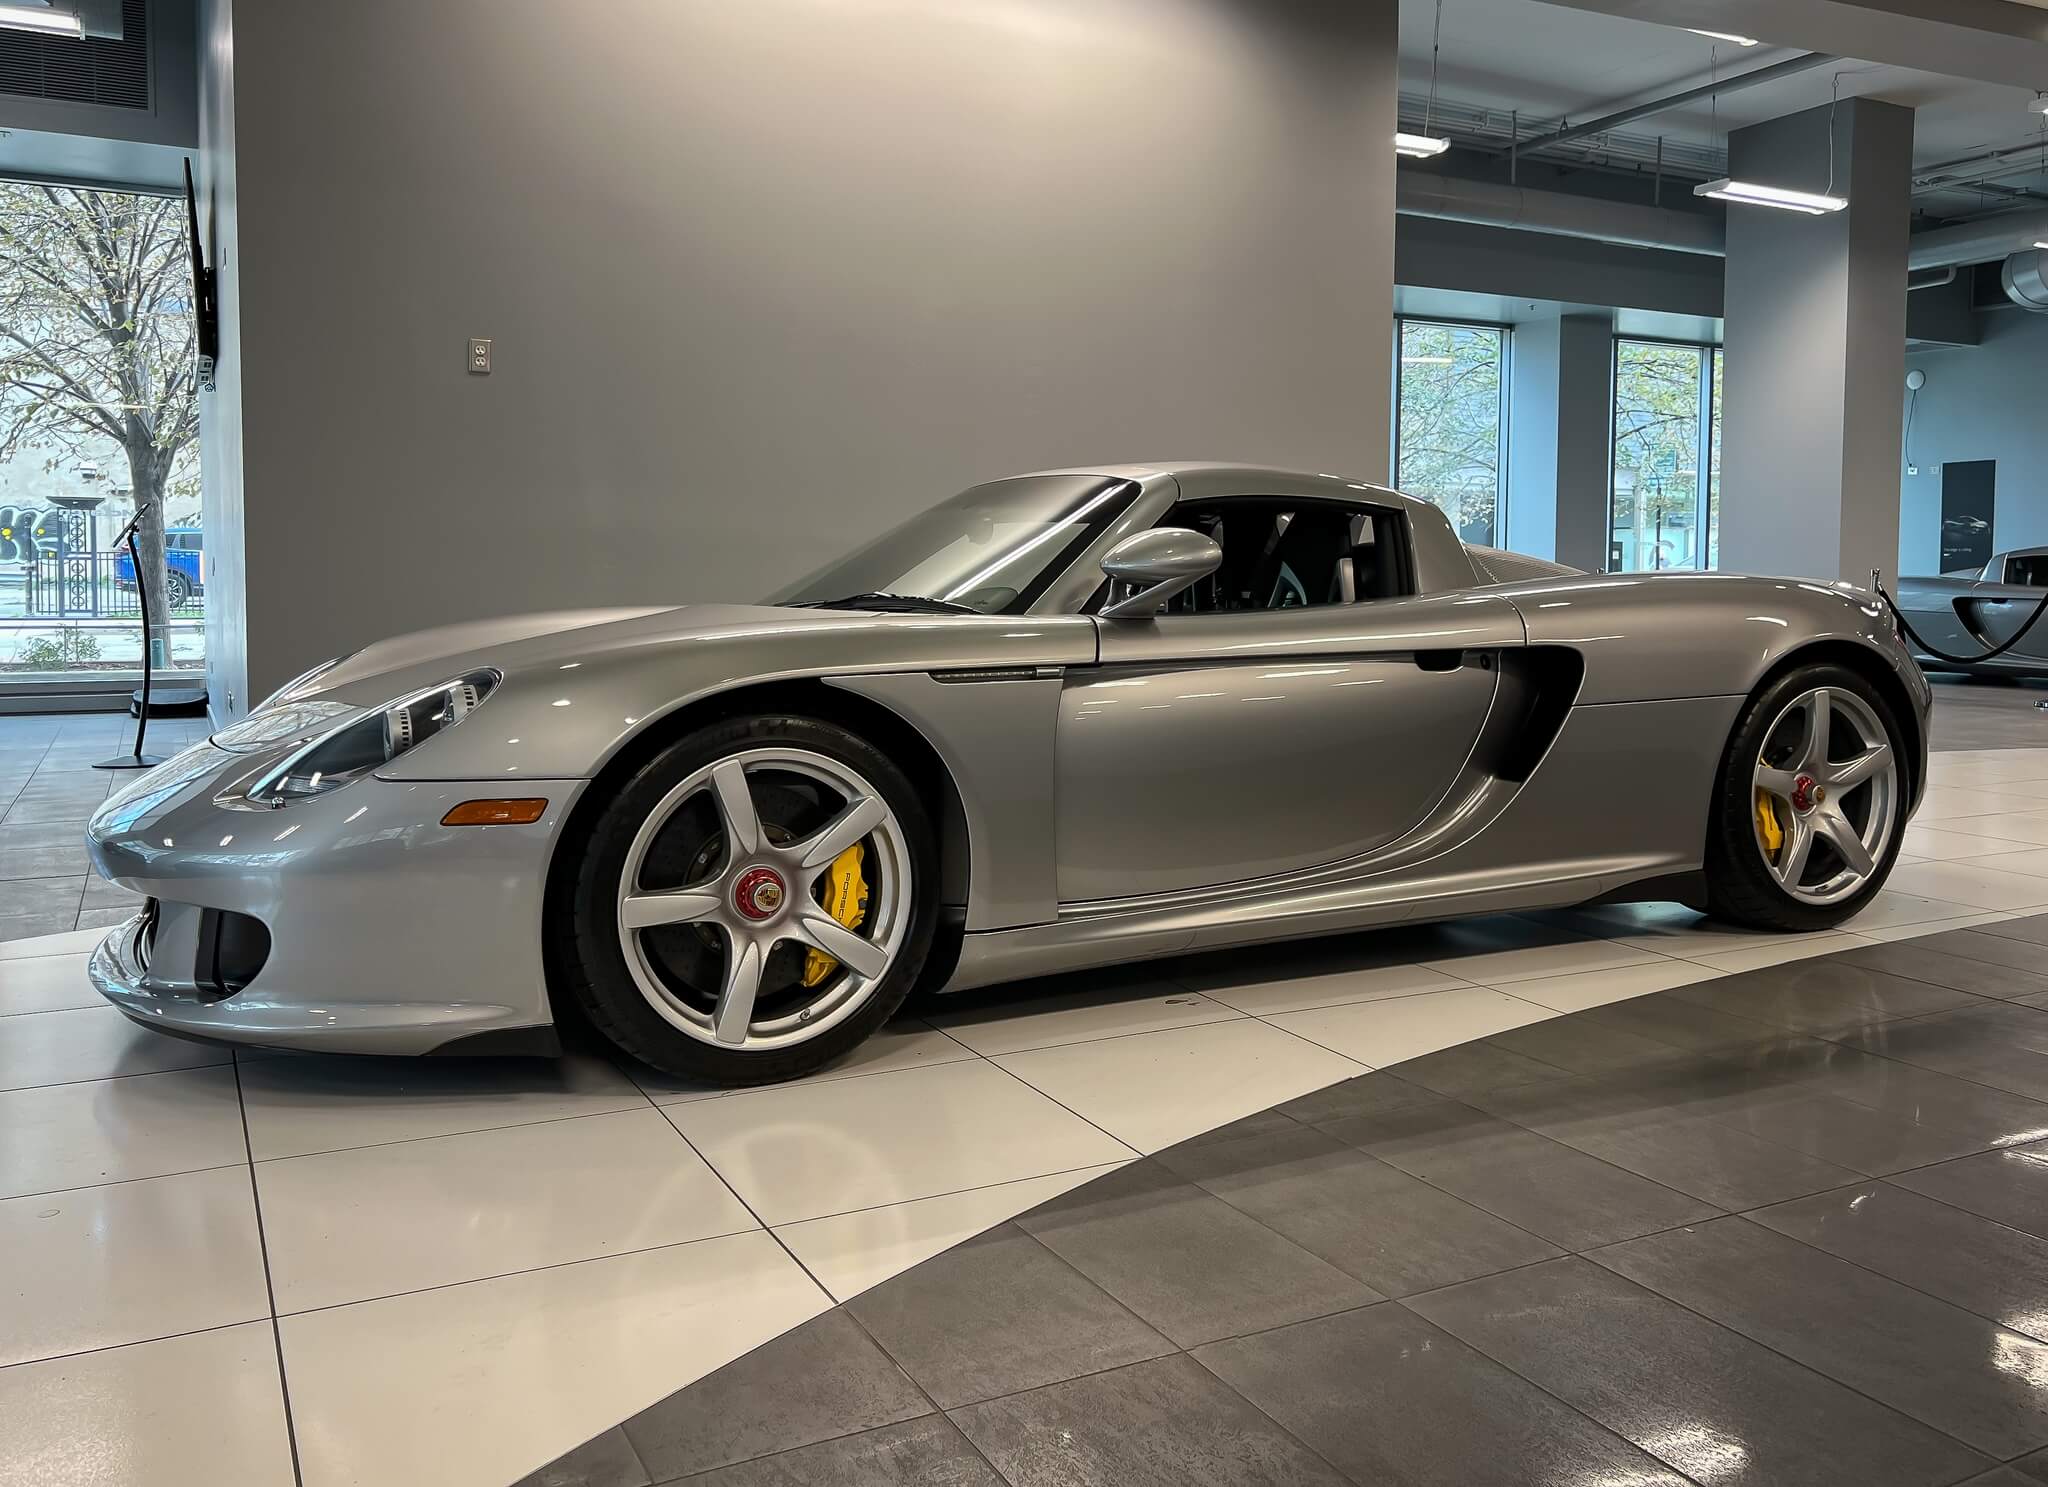 Porsche Carrera GT up for Sale with Just 342 Miles Could Be Yours -  autoevolution